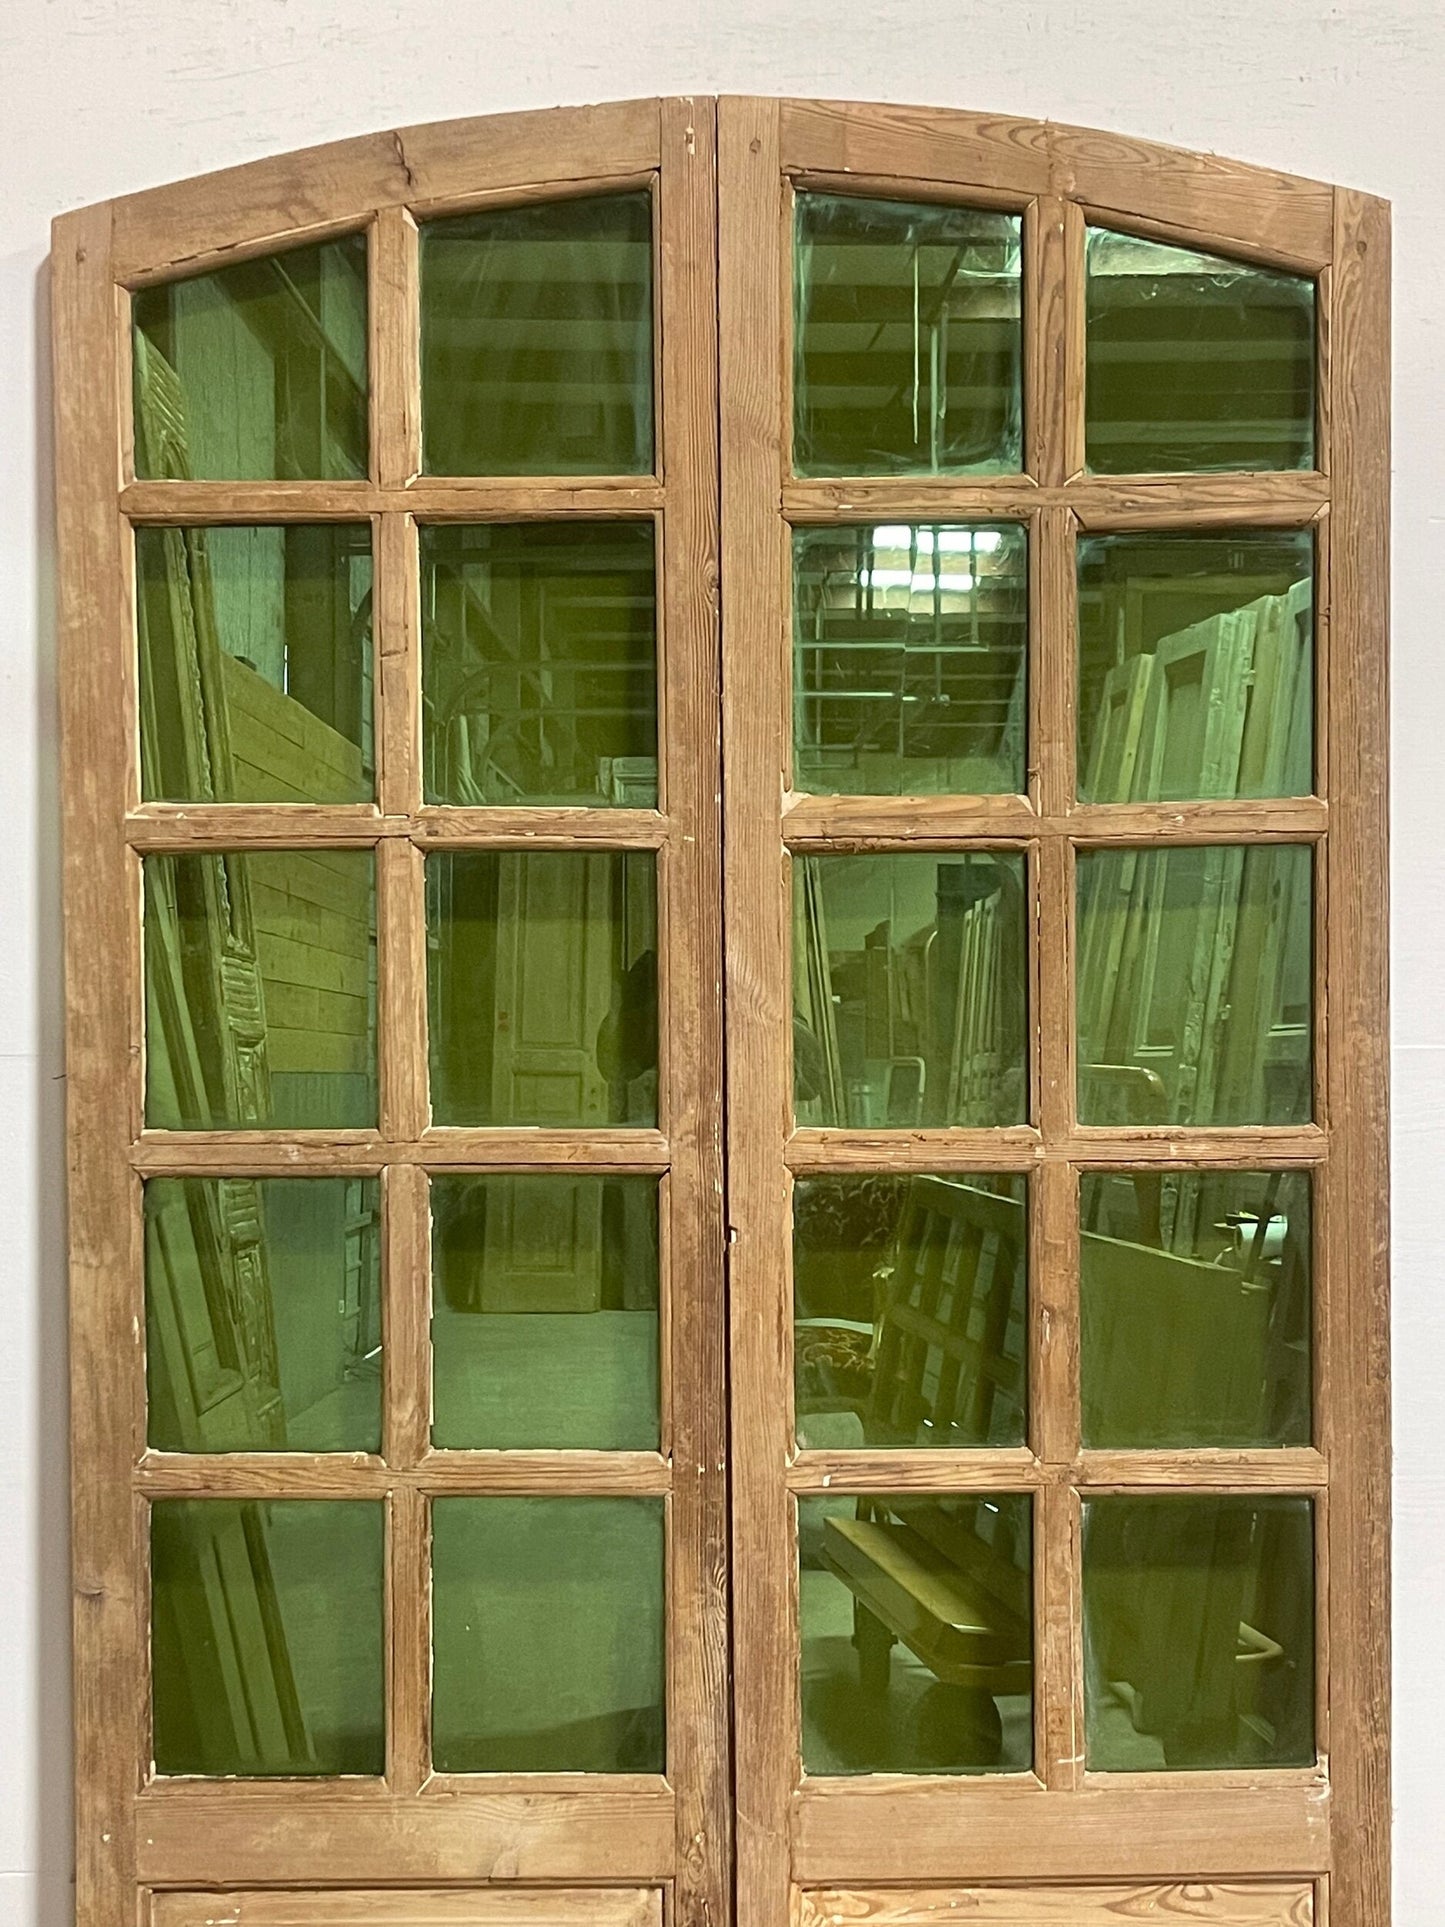 Antique French panel doors with glass (82x47.25) I235